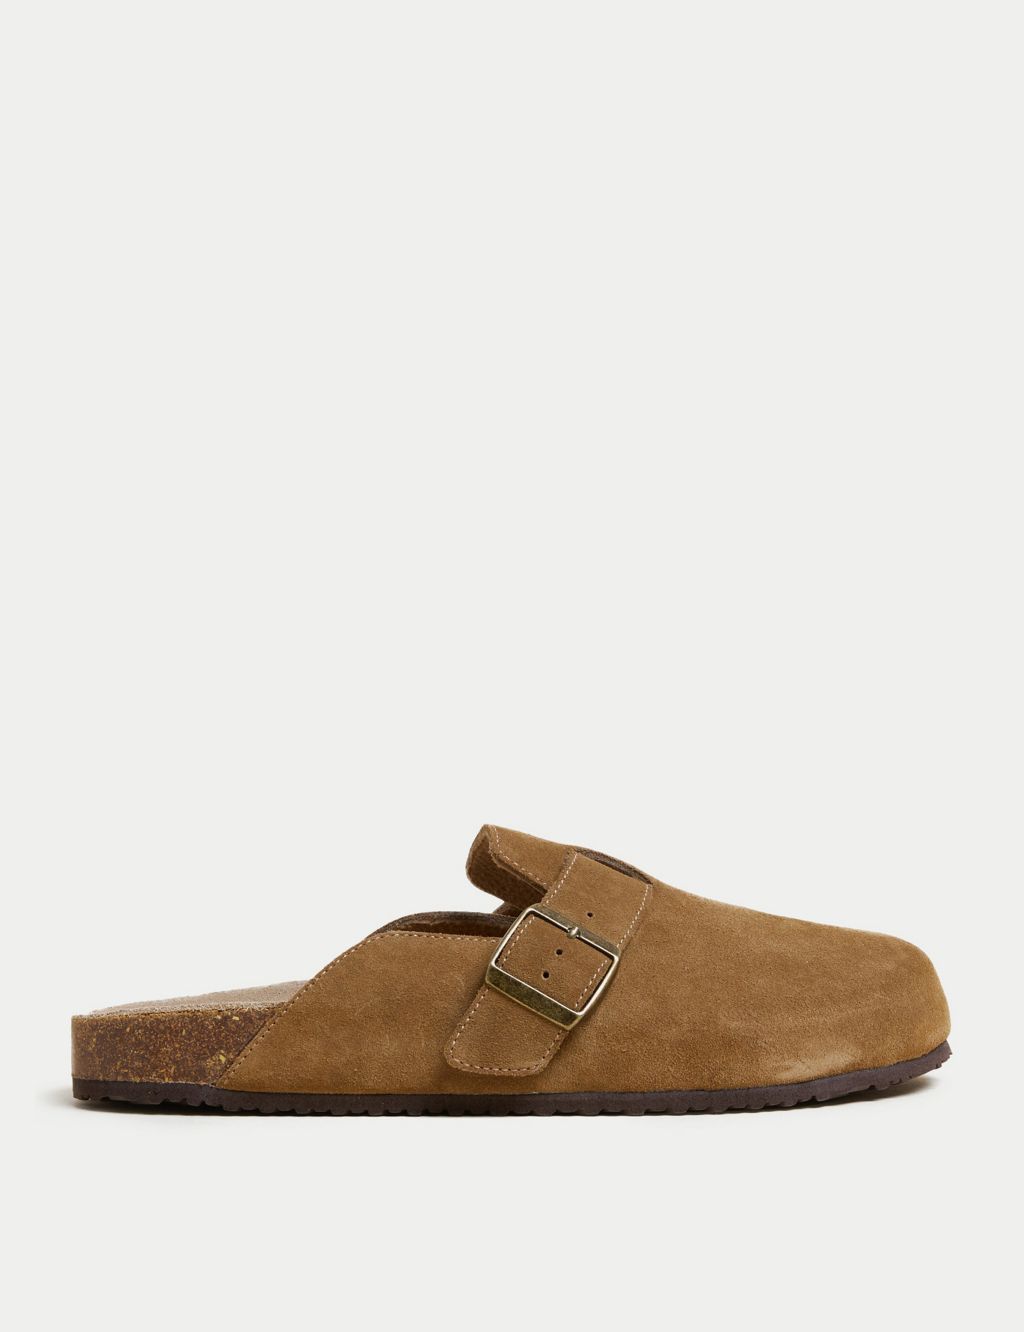 Suede Buckle Mule Slippers with Freshfeet™ image 1